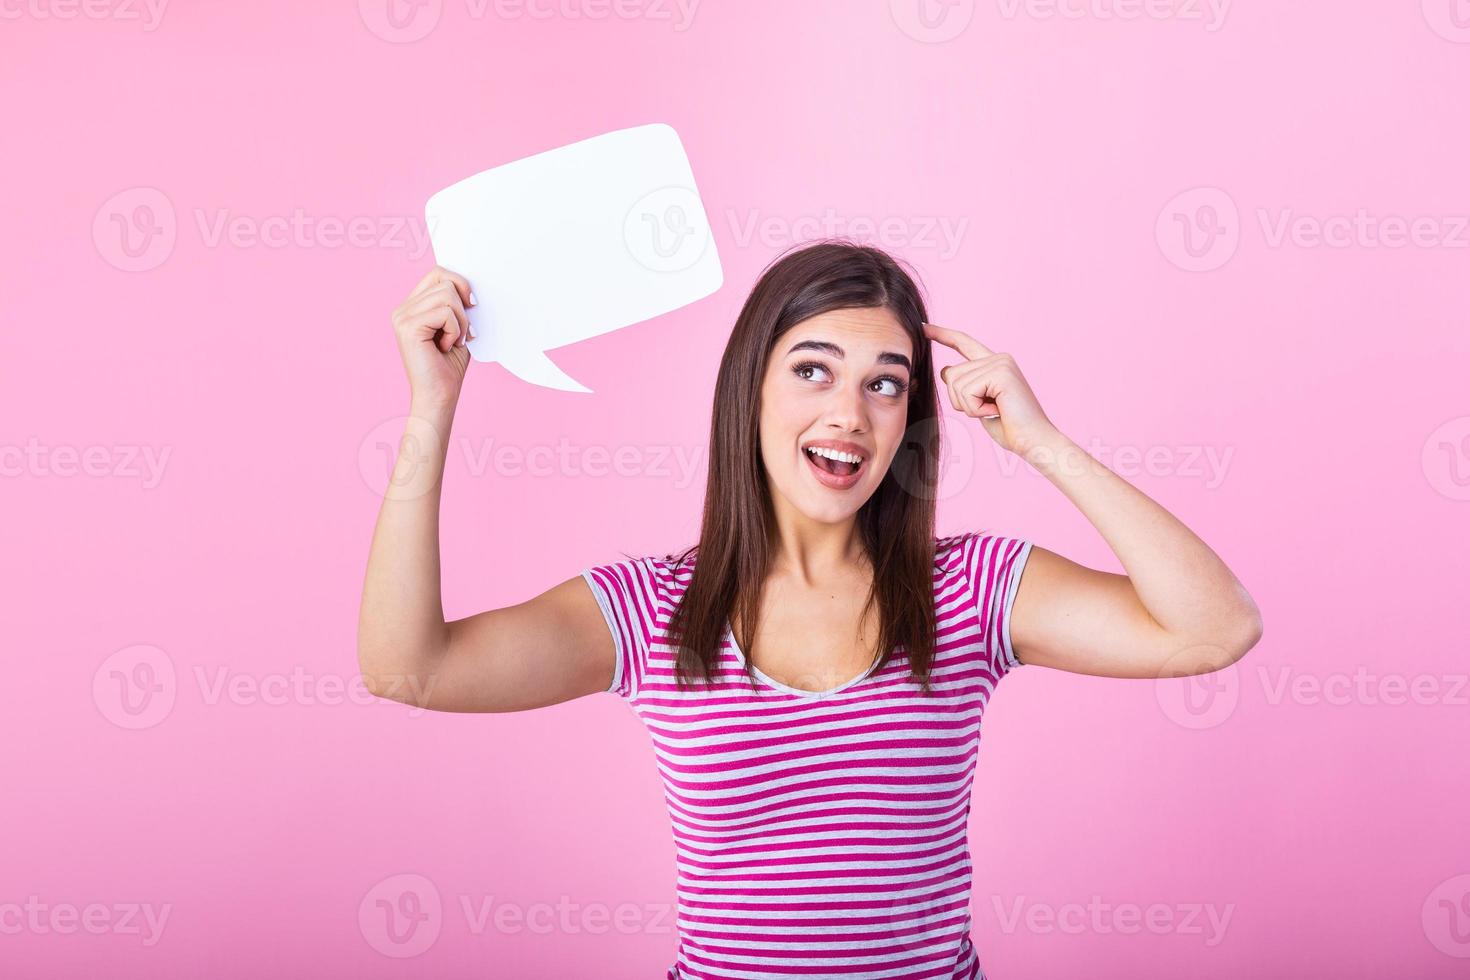 Woman showing sign speech bubble banner looking happy excited on pink background. Beautiful young joyful model on pink background having idea. photo